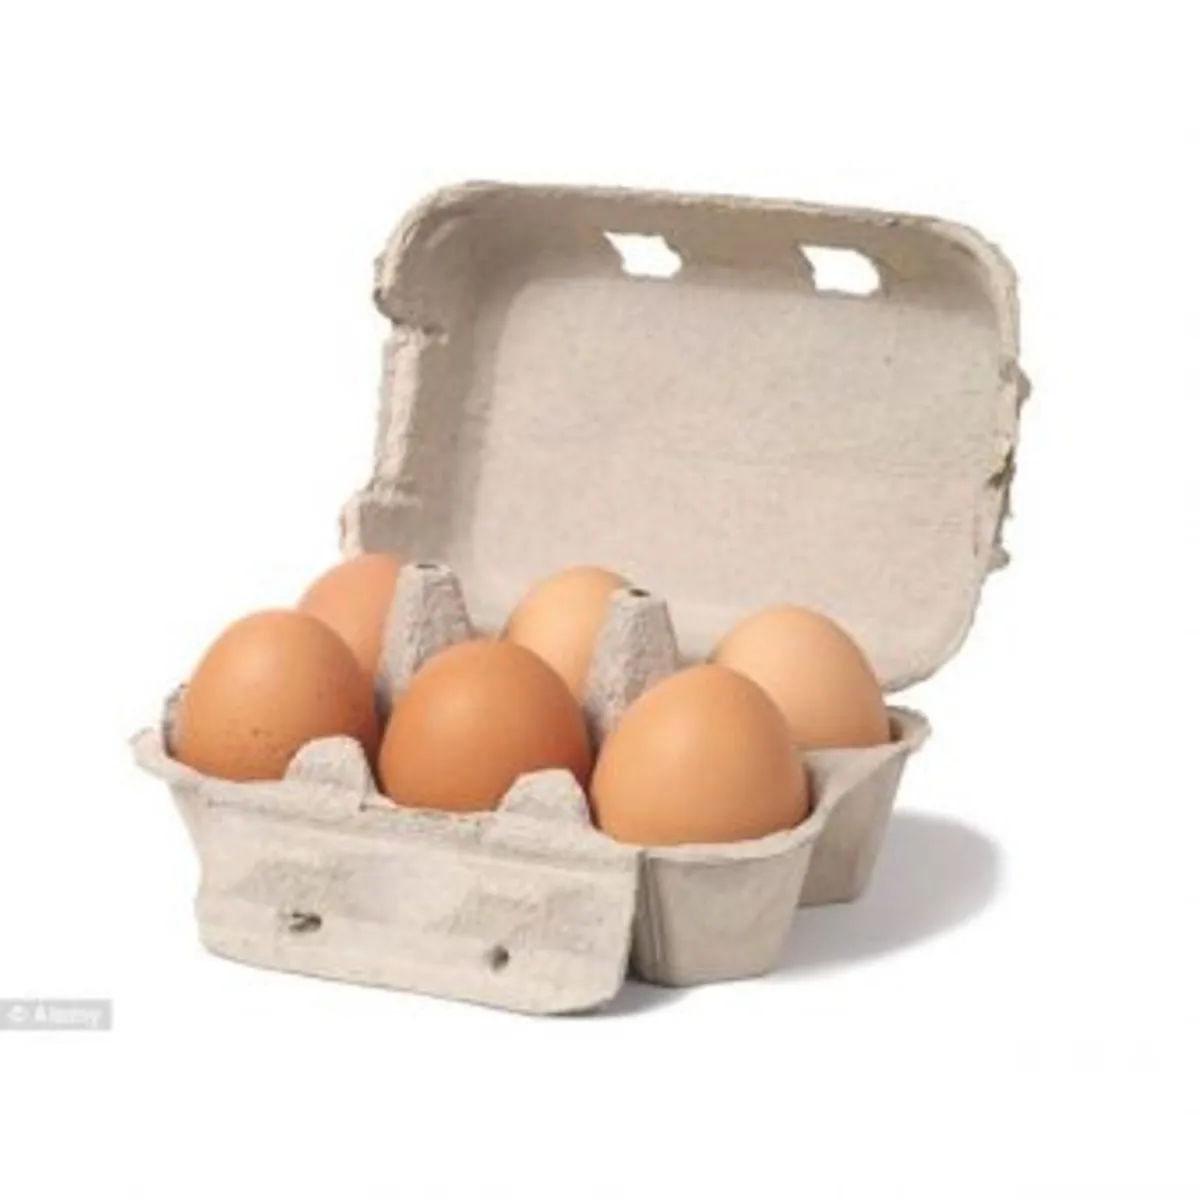 Egg Packaging - Nationwide Delivery - Image 1